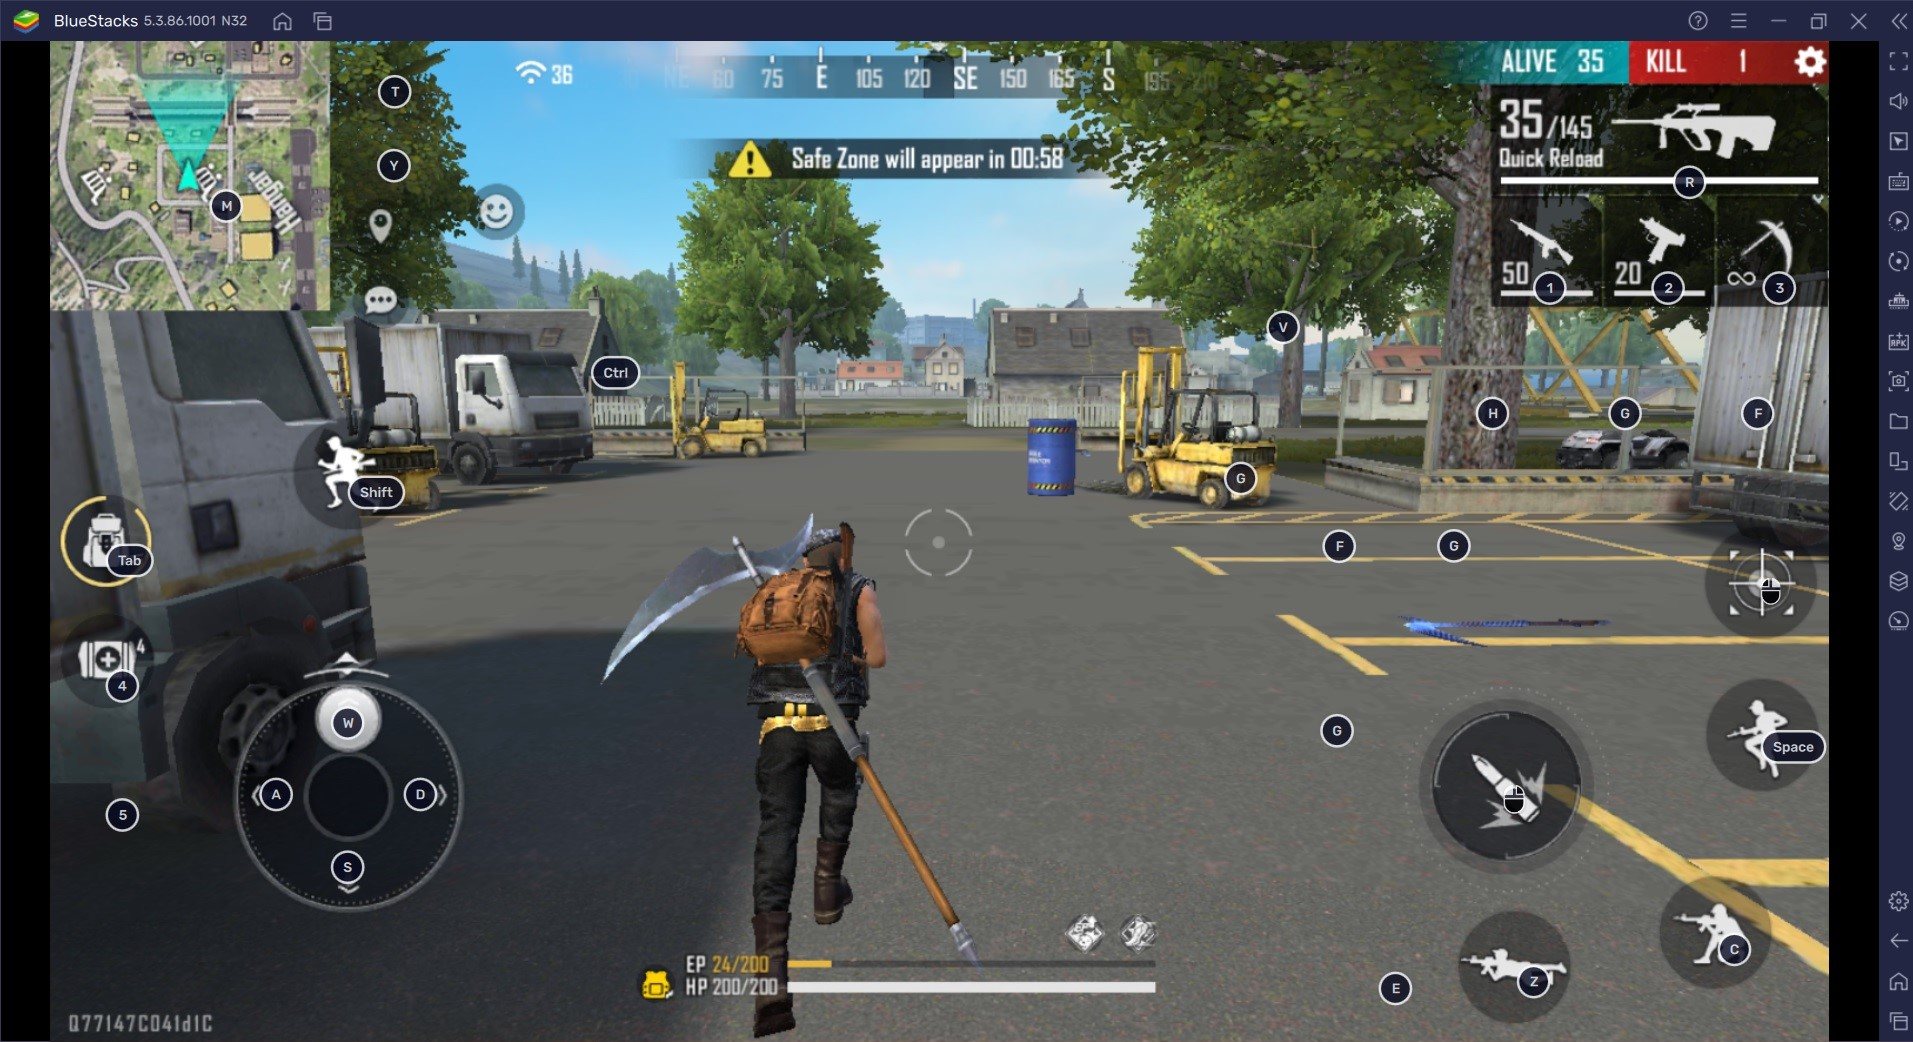 Free Fire Max: All you need to know